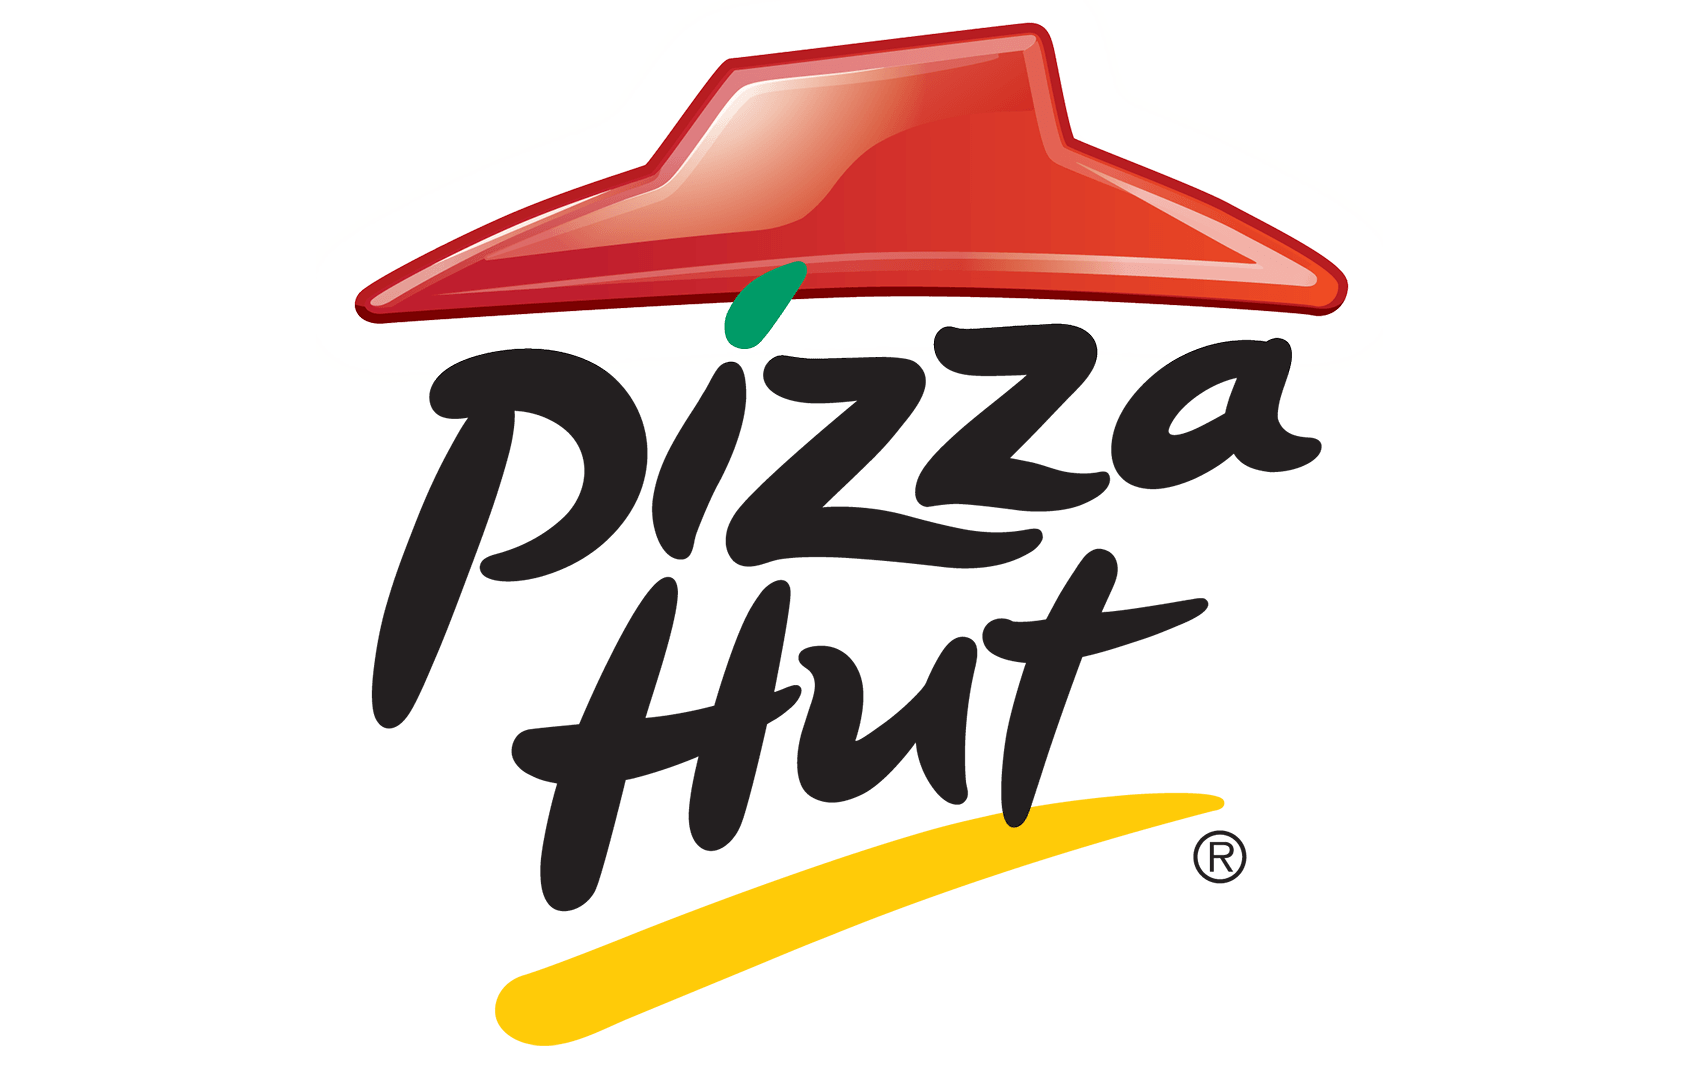 Pizza Hut Logo - Pizza Hut Logo, Pizza Hut Symbol, Meaning, History and Evolution